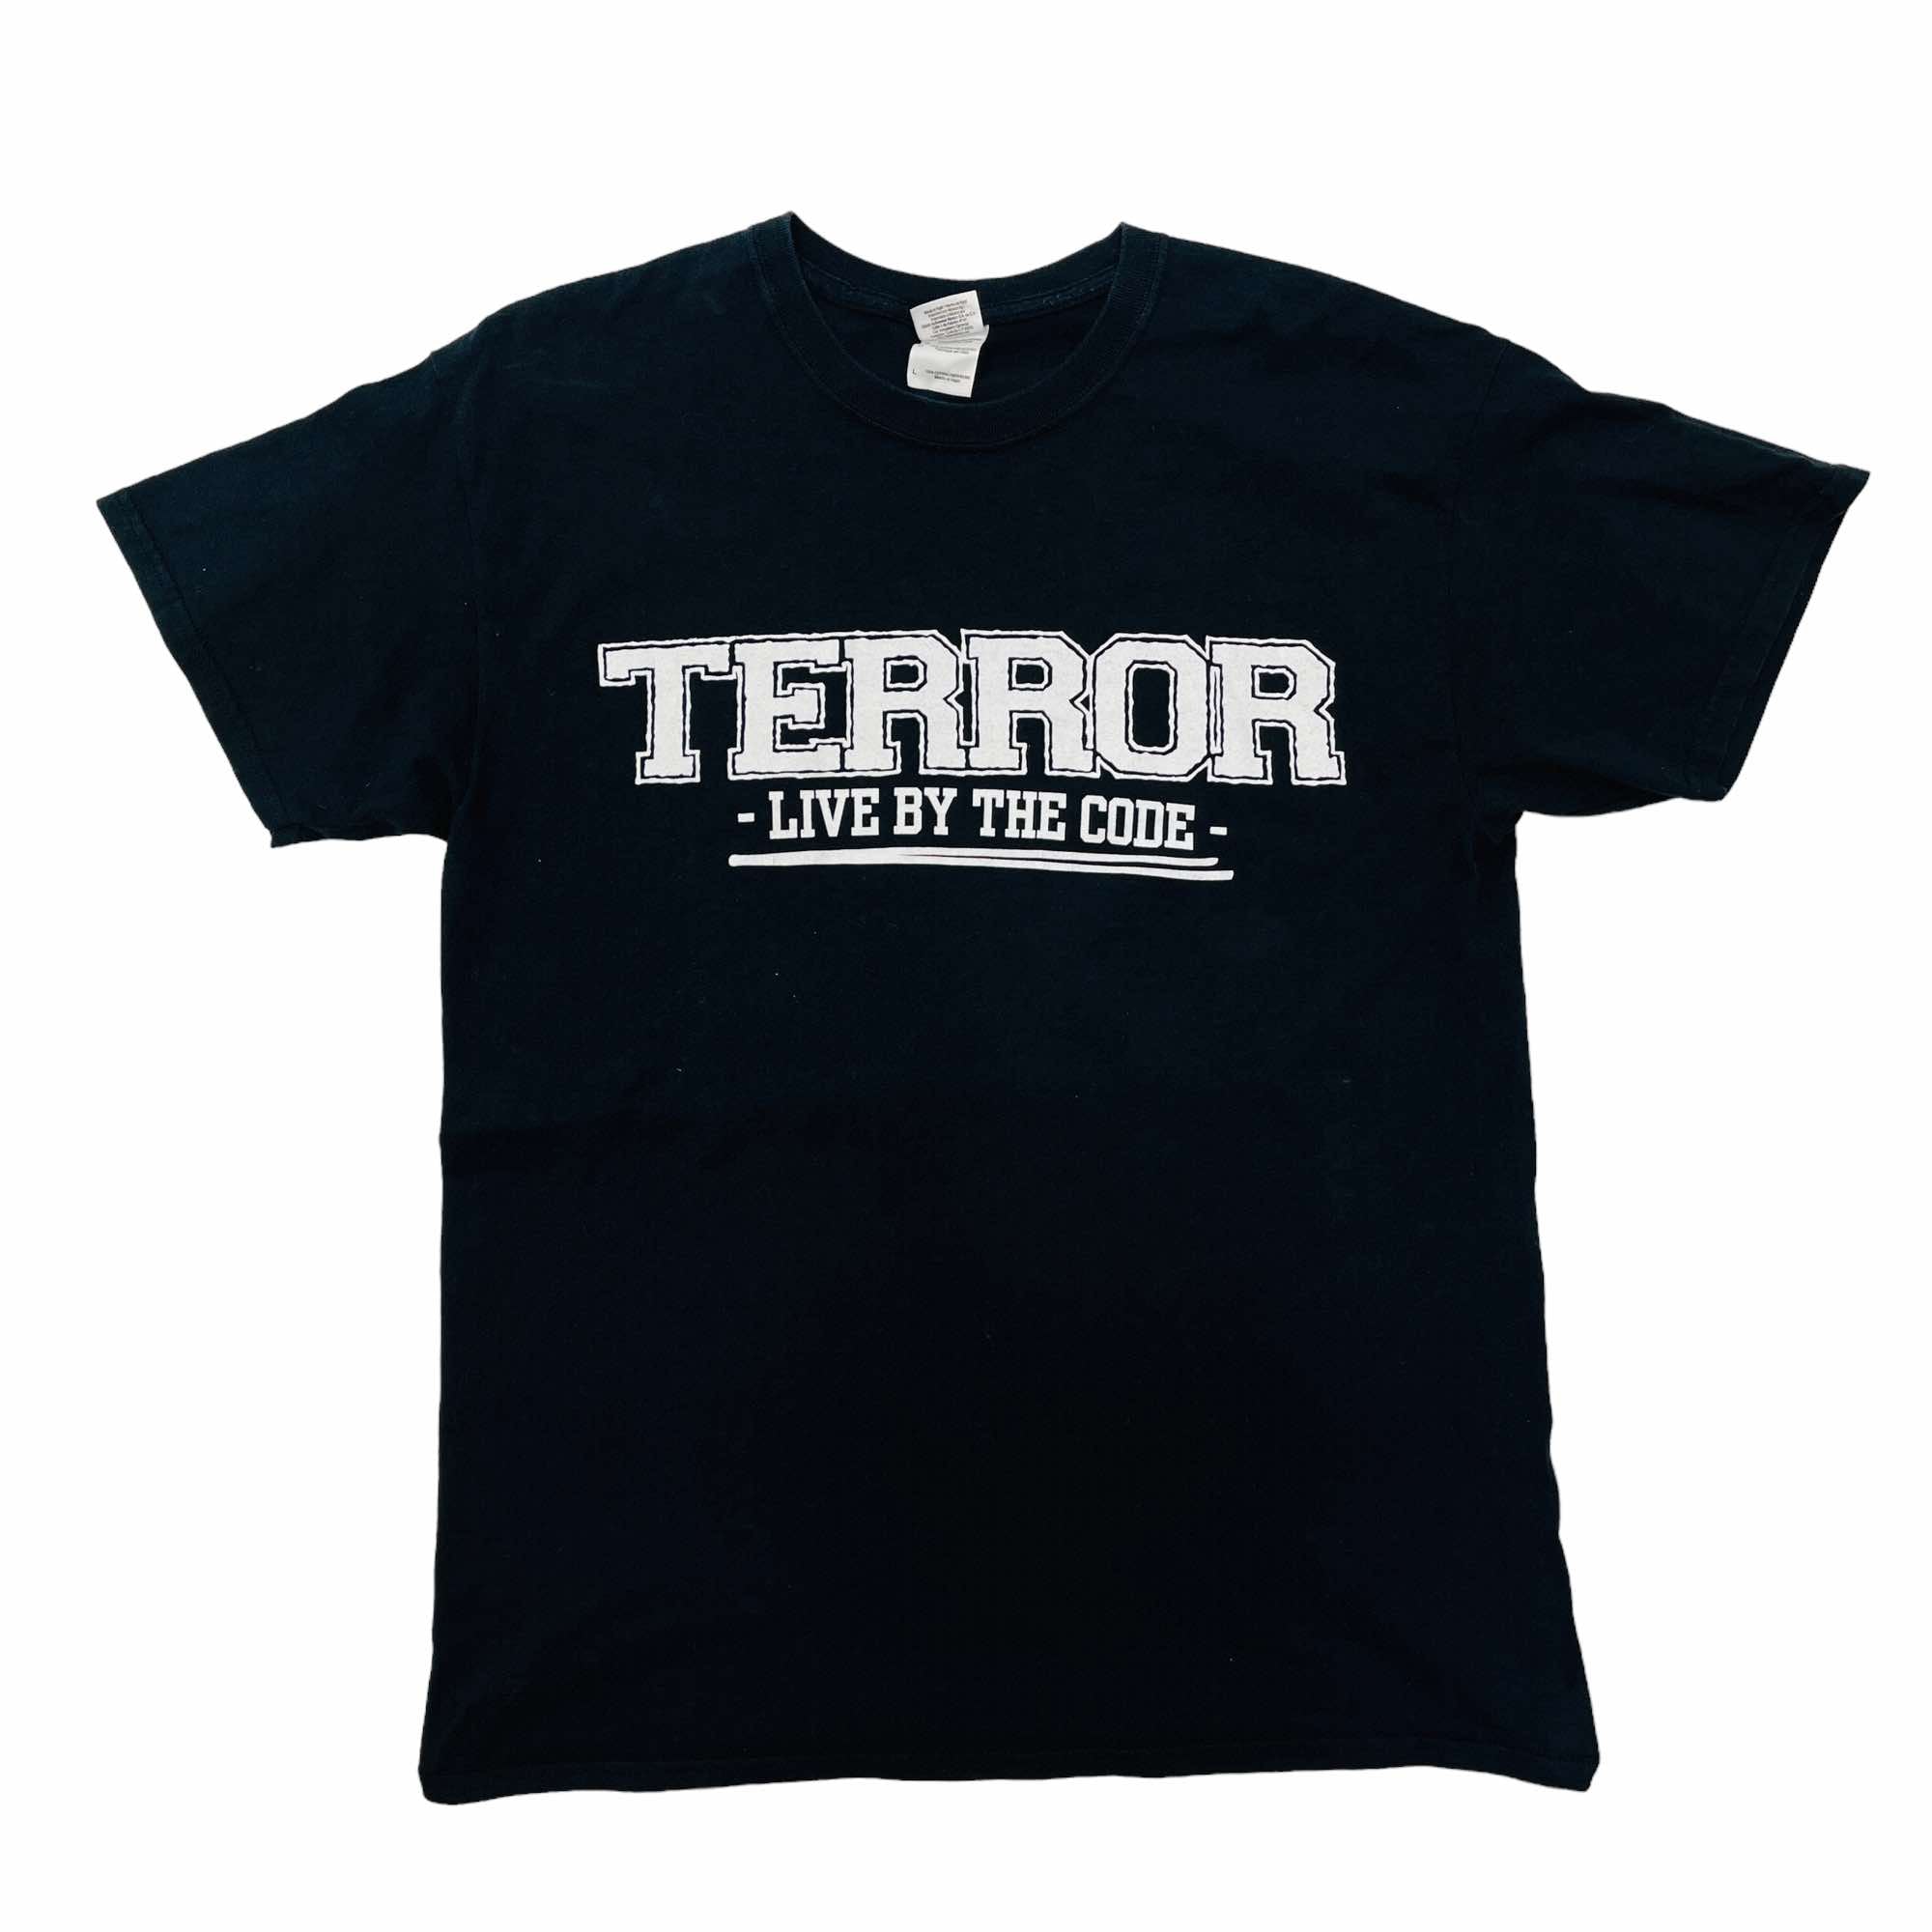 Terror "Live by the Code" T-Shirt - Large